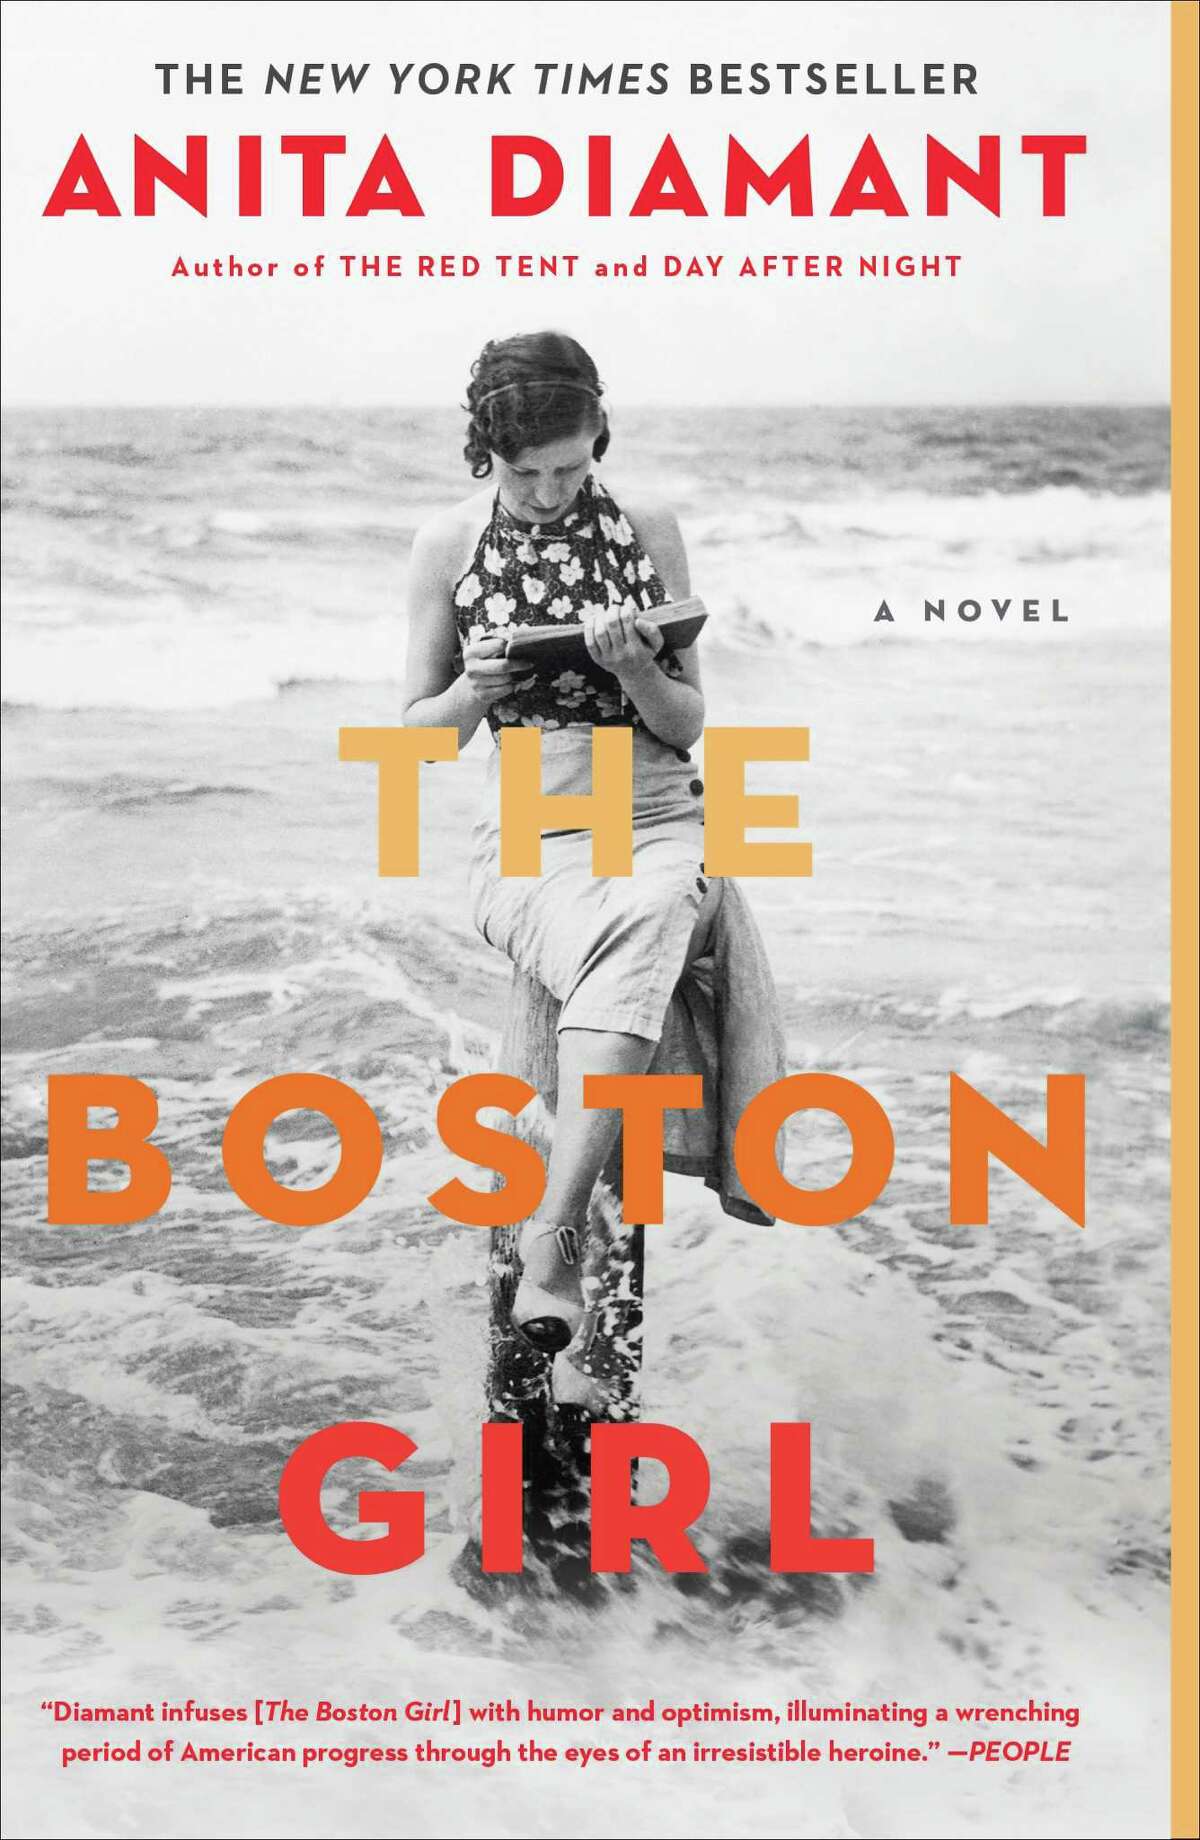 Best-selling author Anita Diamant will be visiting the Harry Bennett Library in Stamford on Wednesday, Sept. 2, to talk about her latest novel "The Boston Girl."